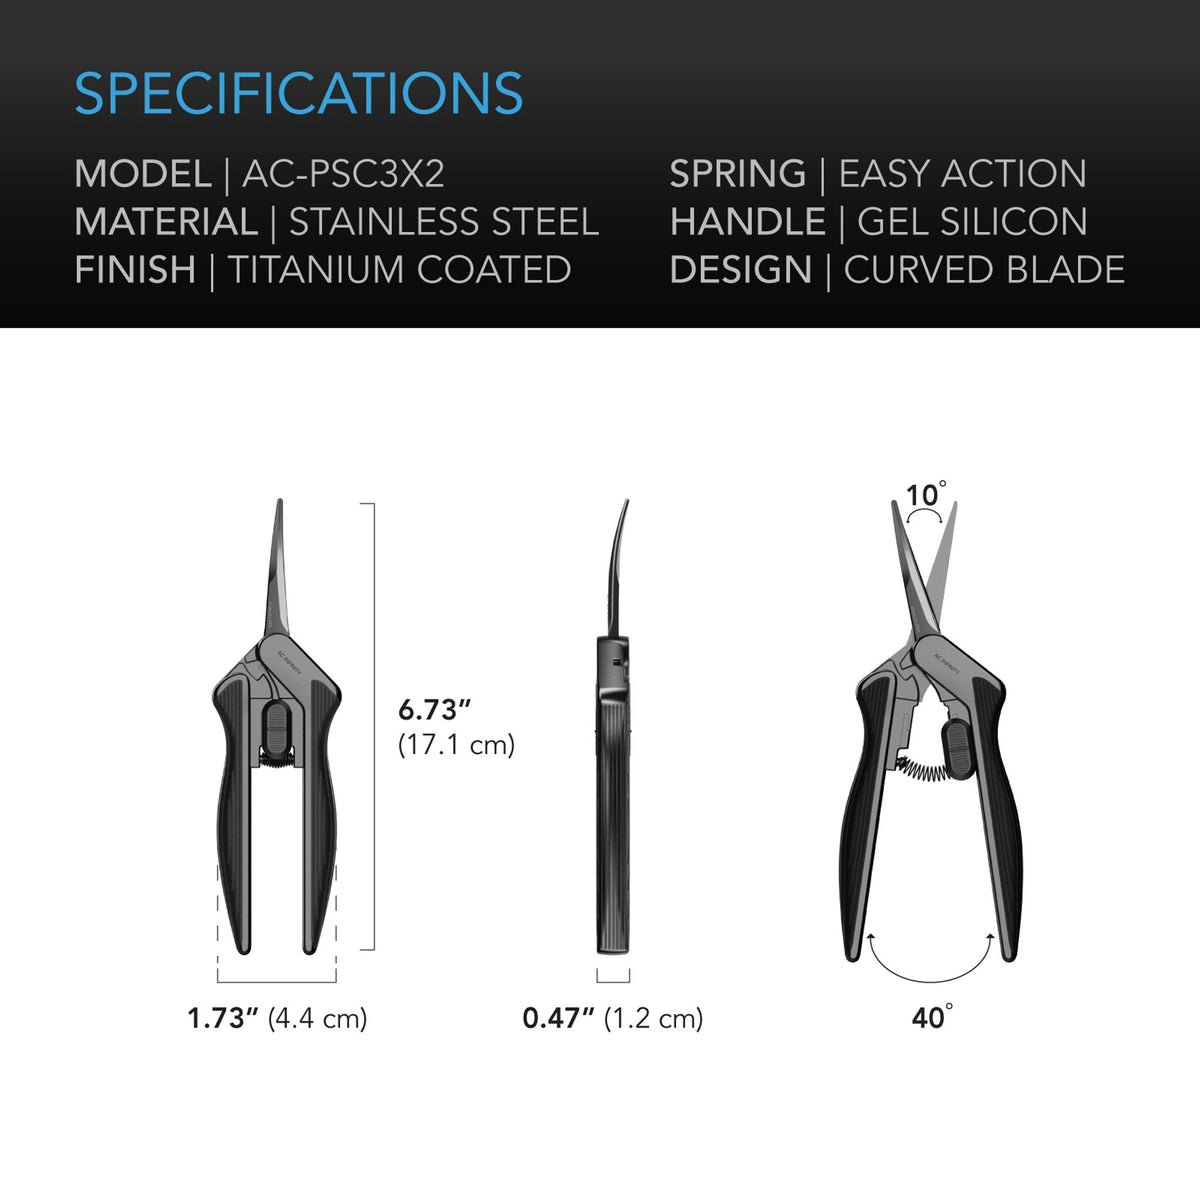 AC Infinity AC Infinity Stainless Steel Curved Pruning Shear Trimming Scissors Specs